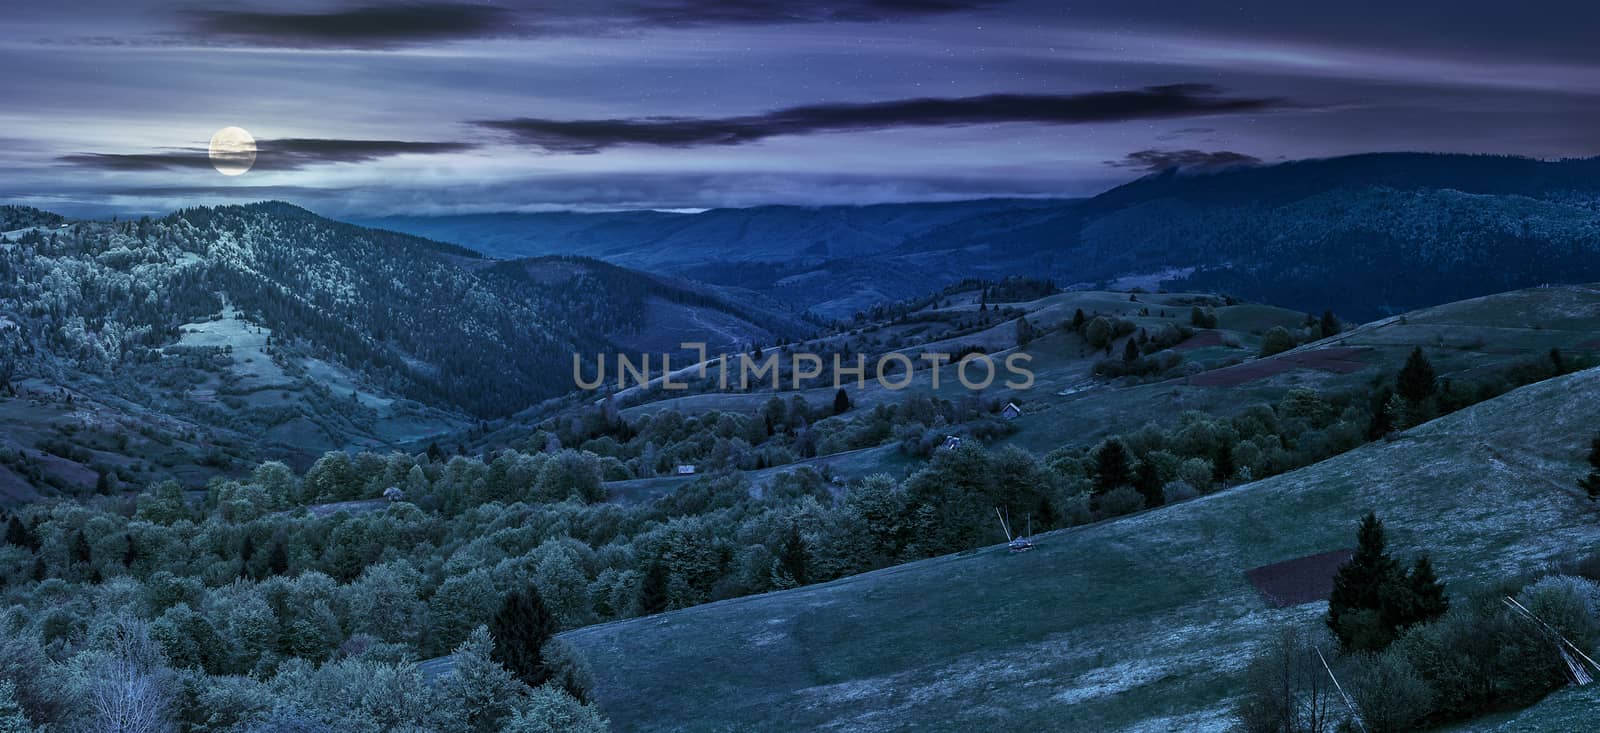 Panoramic rural landscape. forest in mountain rural area. green agricultural field on a hillside. beautiful summer scenery at night in full moon light